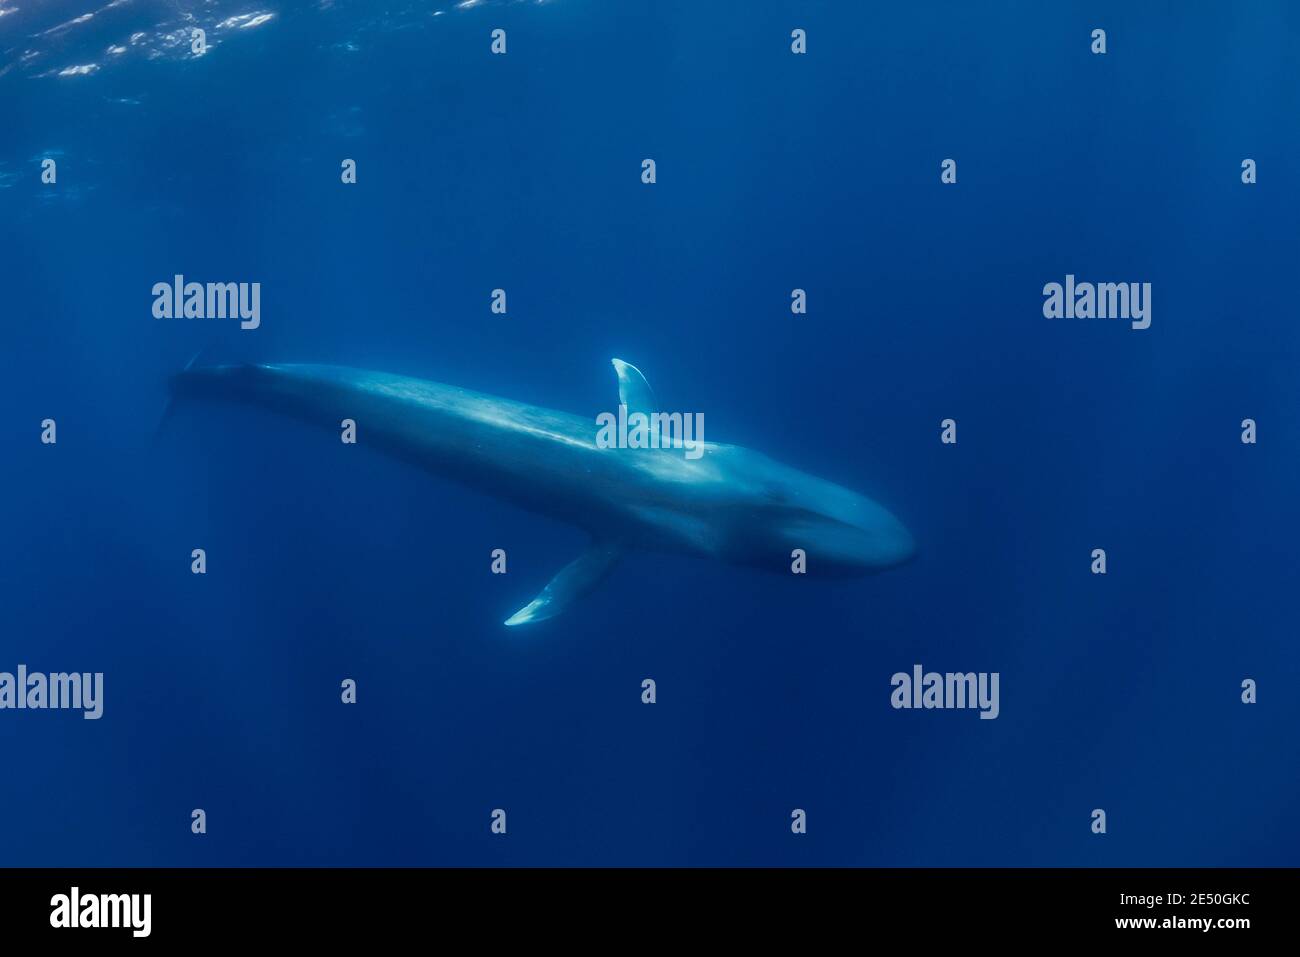 blue whale, Balaenoptera musculus, endangered species, Pico Island, Azores, Portugal, Atlantic Ocean Stock Photo